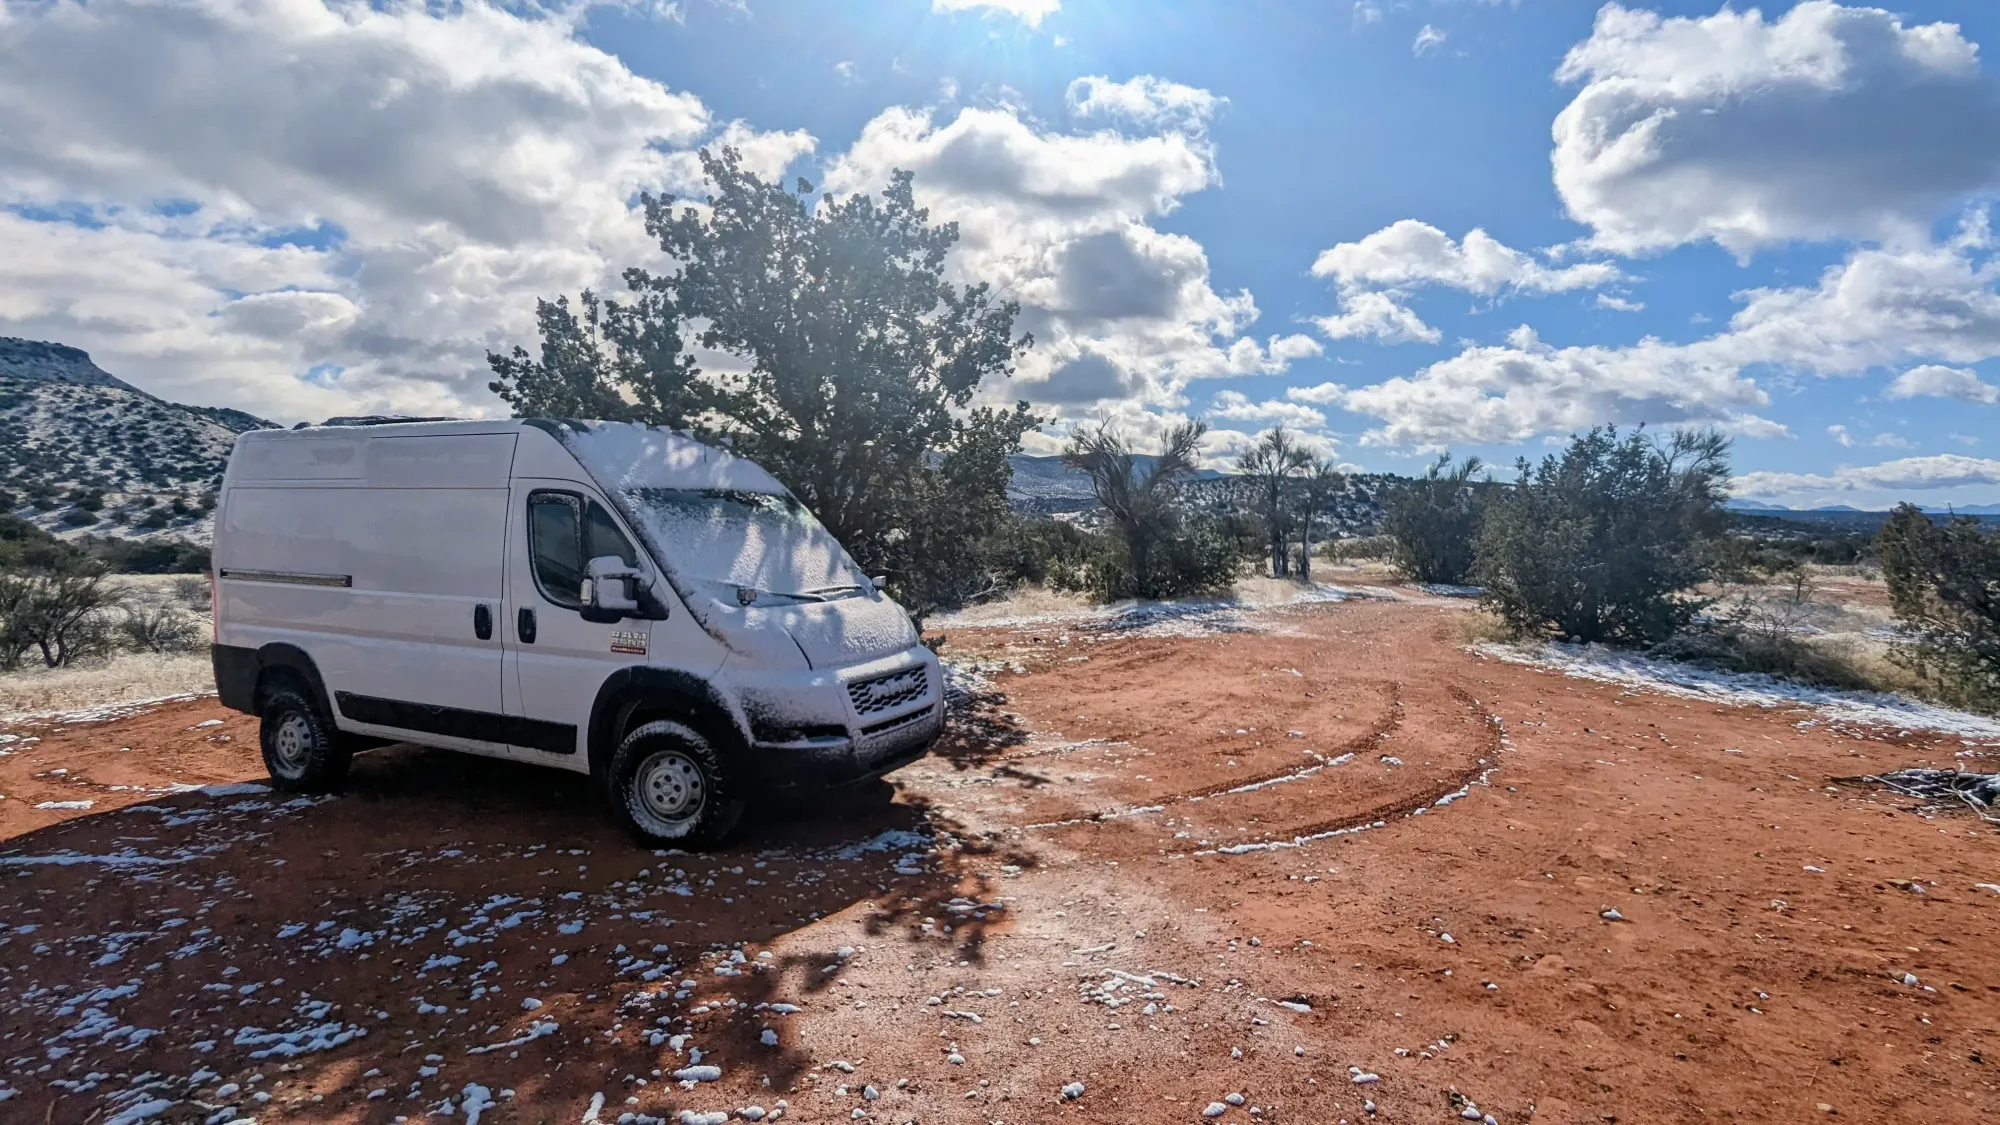 Solar Power In The Winter - Surviving Van Life Winters Off The Grid